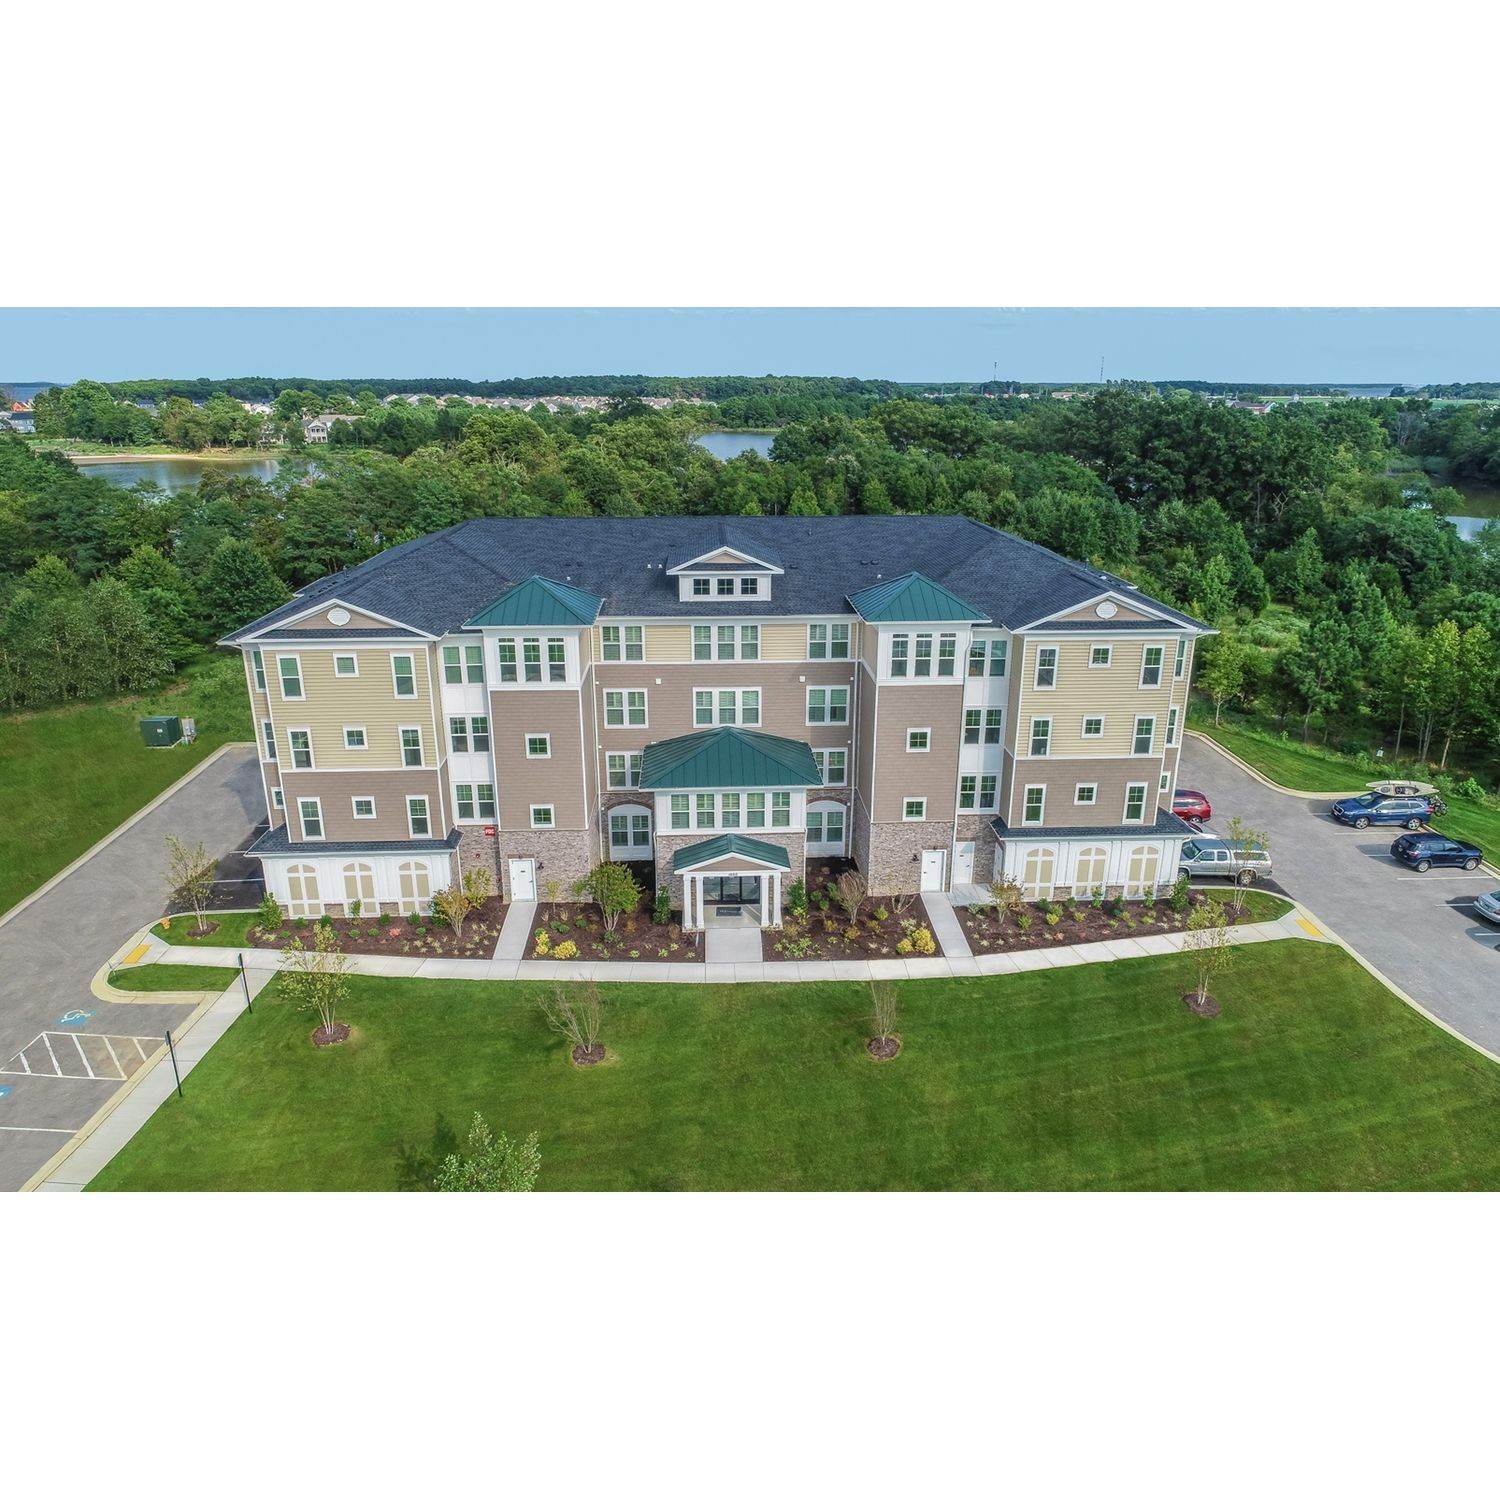 2. 131 Flycatcher Way, Chester, MD 21619에 K. Hovnanian’s® Four Seasons at Kent Island - Luxury Condos 건물